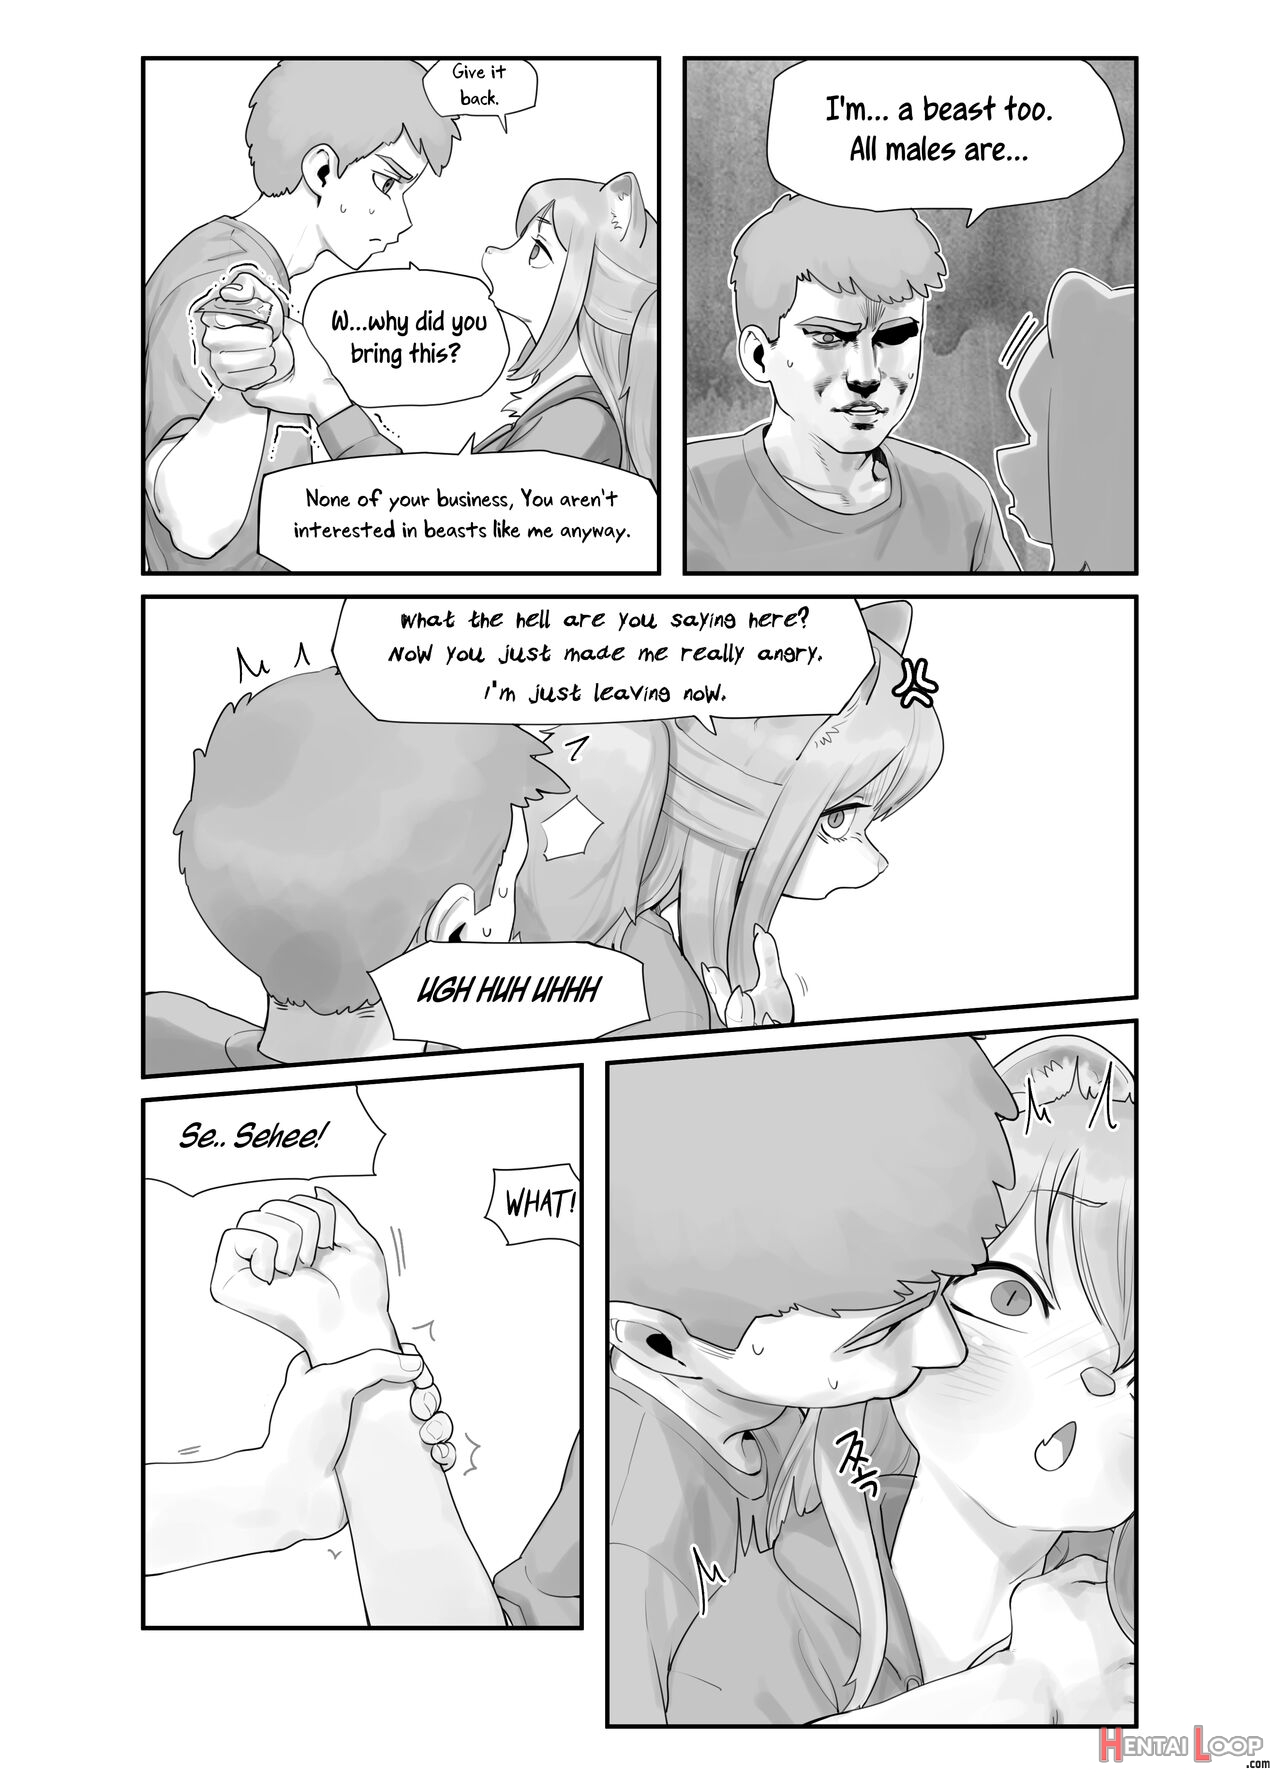 A Suspiciously Erotic Childhood Friend page 3